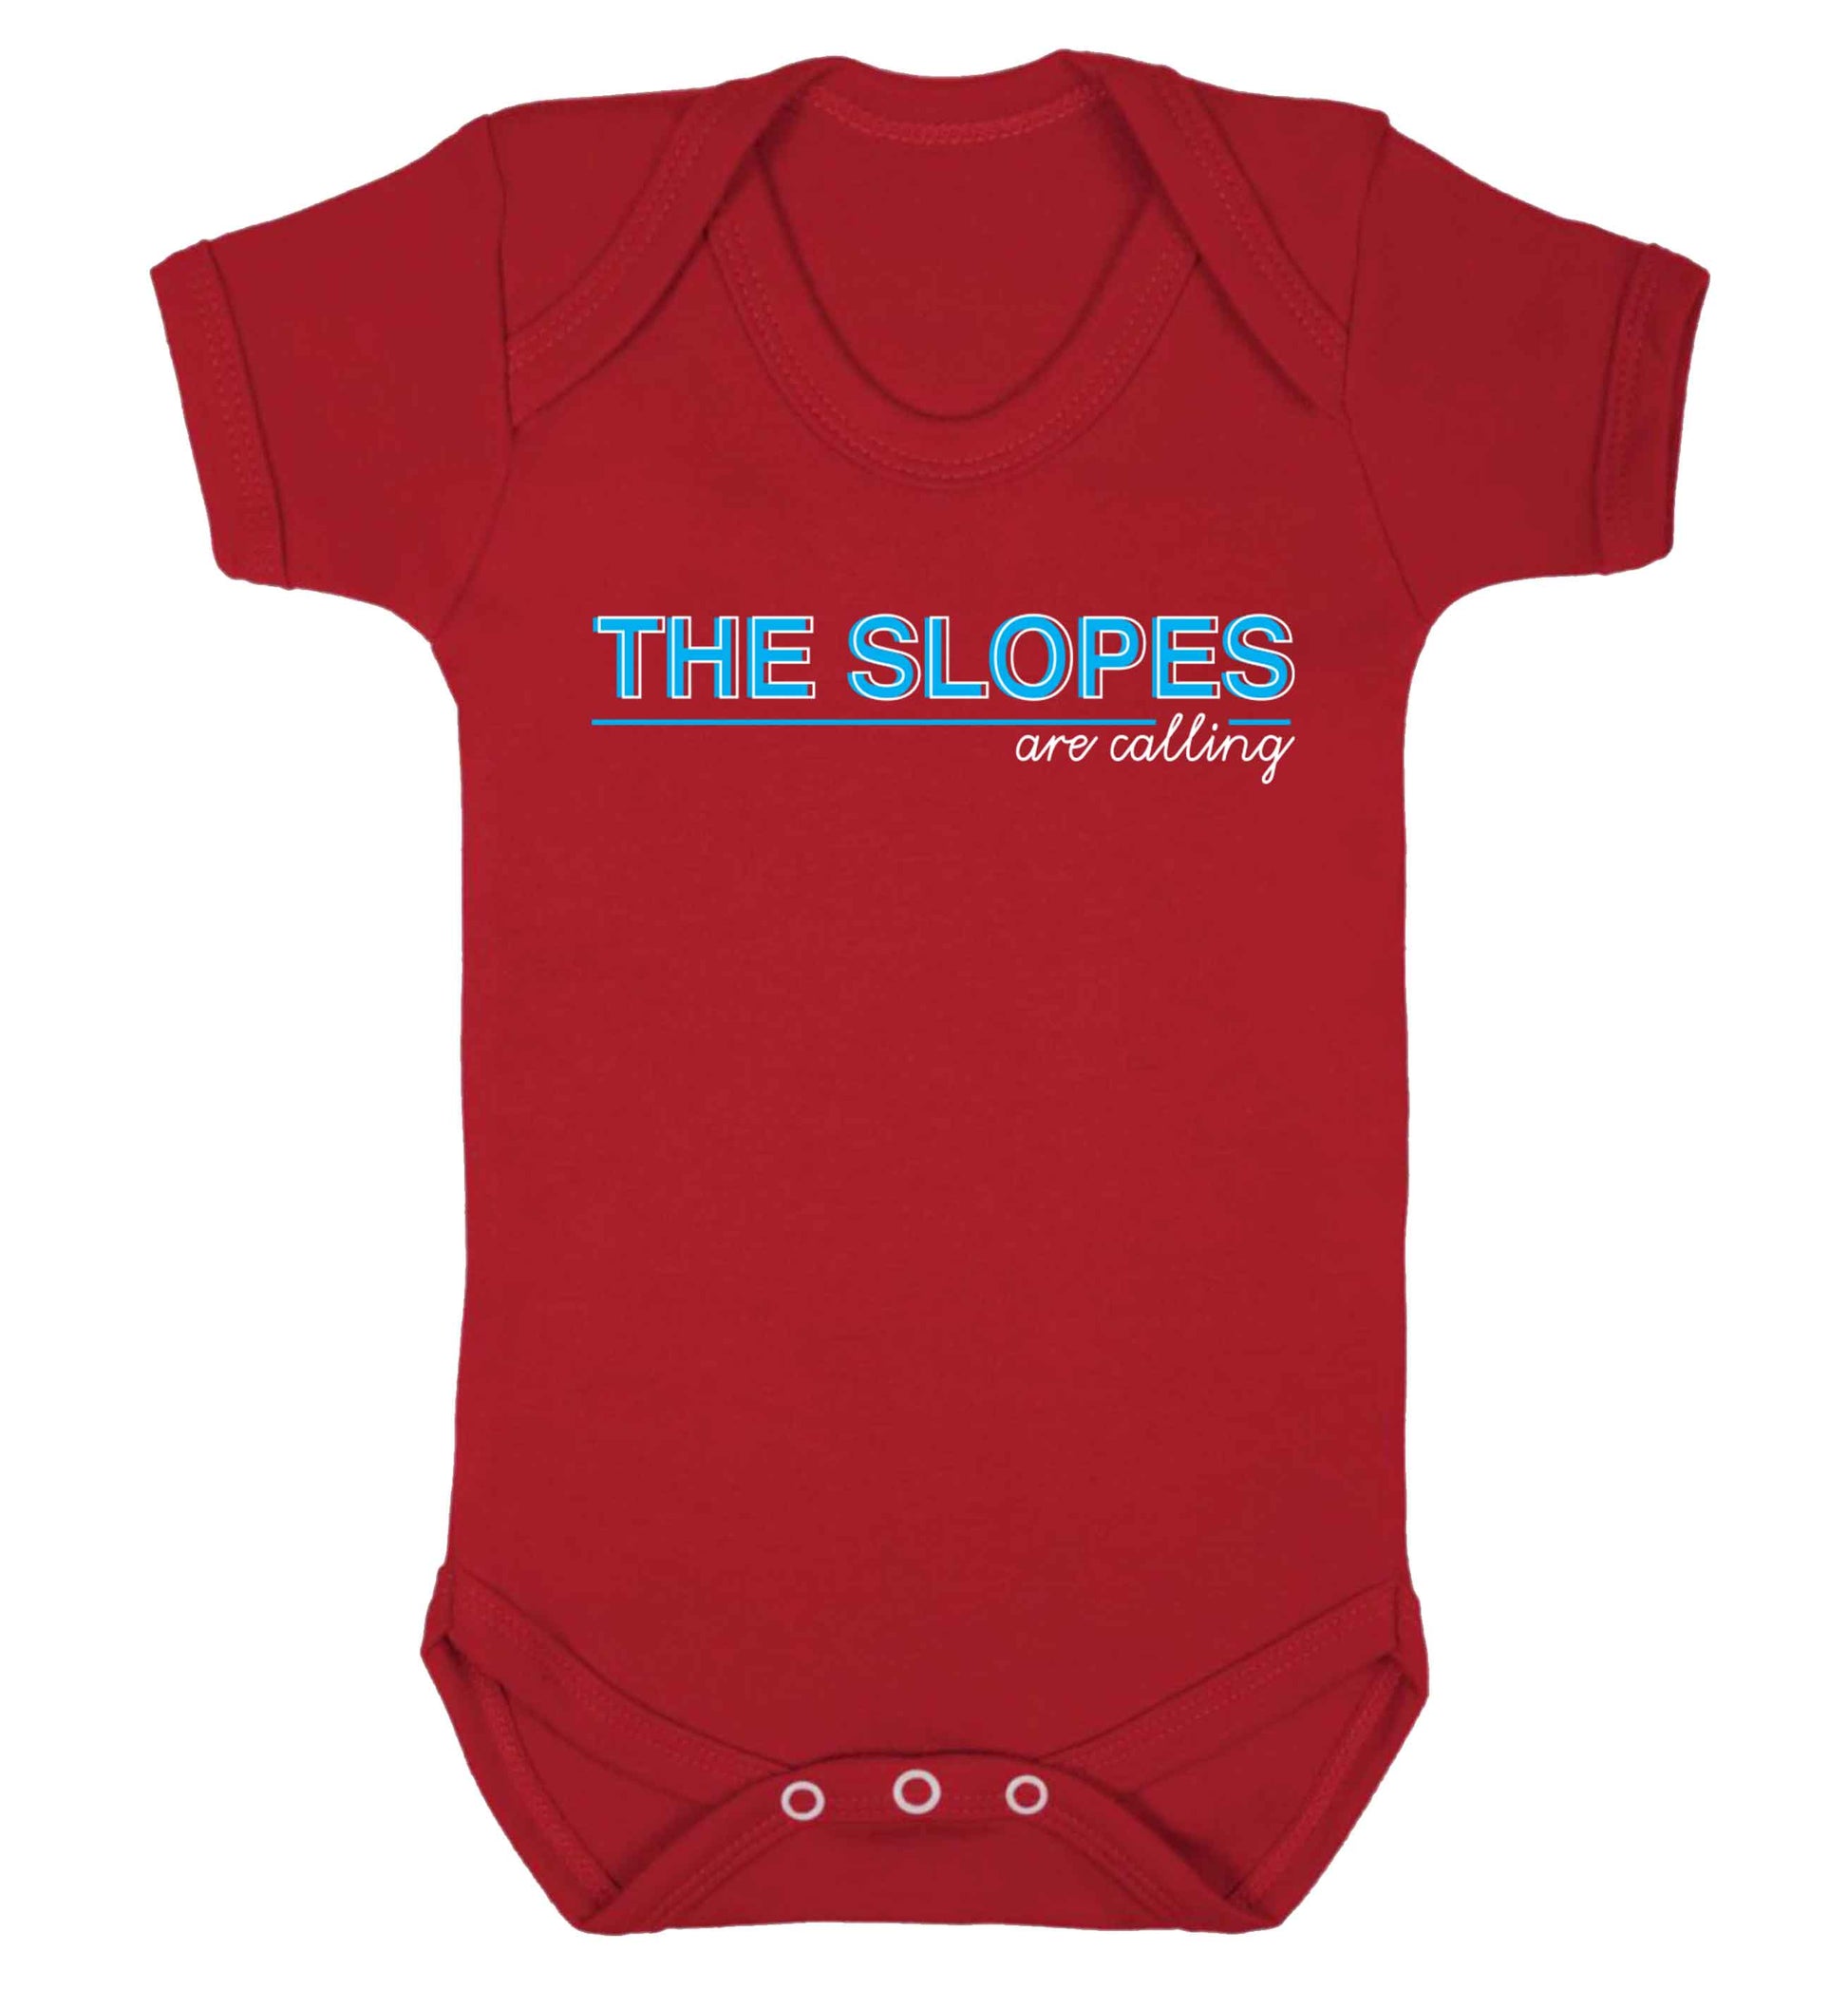 The slopes are calling Baby Vest red 18-24 months